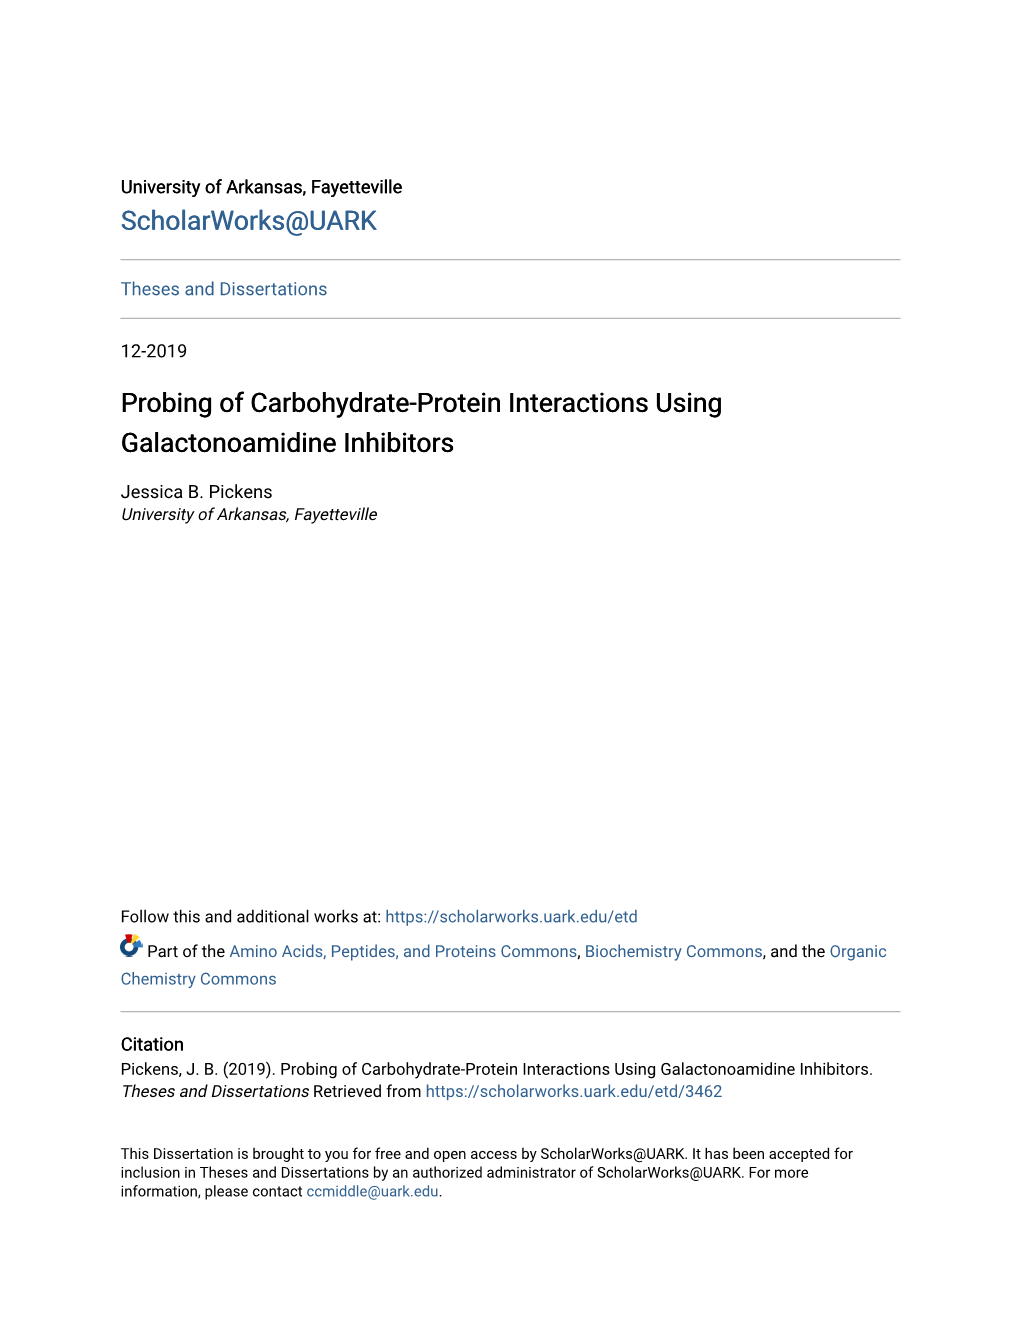 Probing of Carbohydrate-Protein Interactions Using Galactonoamidine Inhibitors